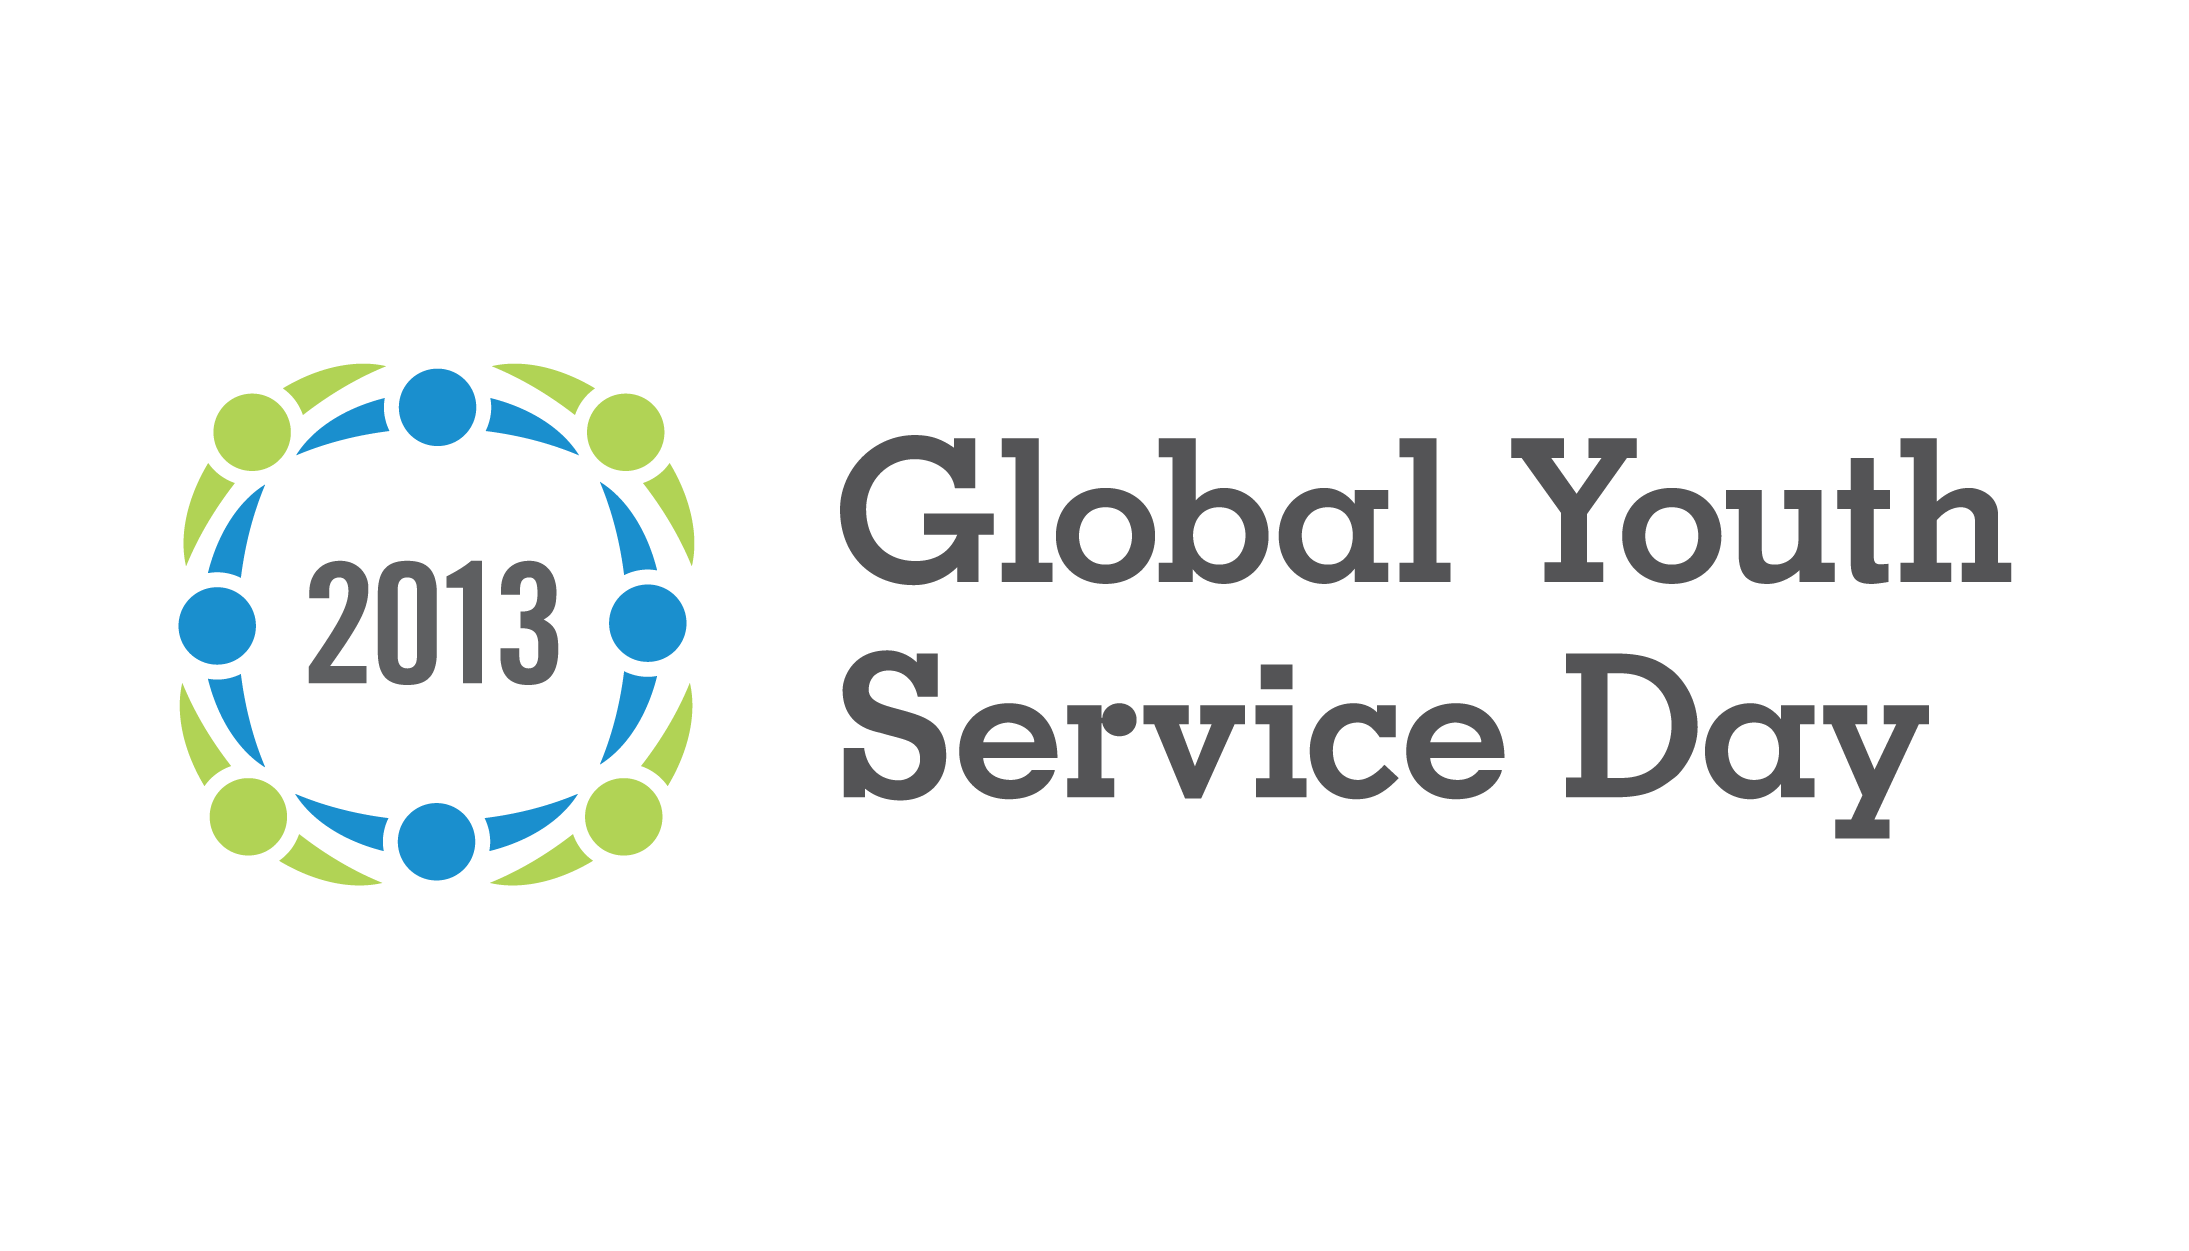 Global Youth Service Day logo